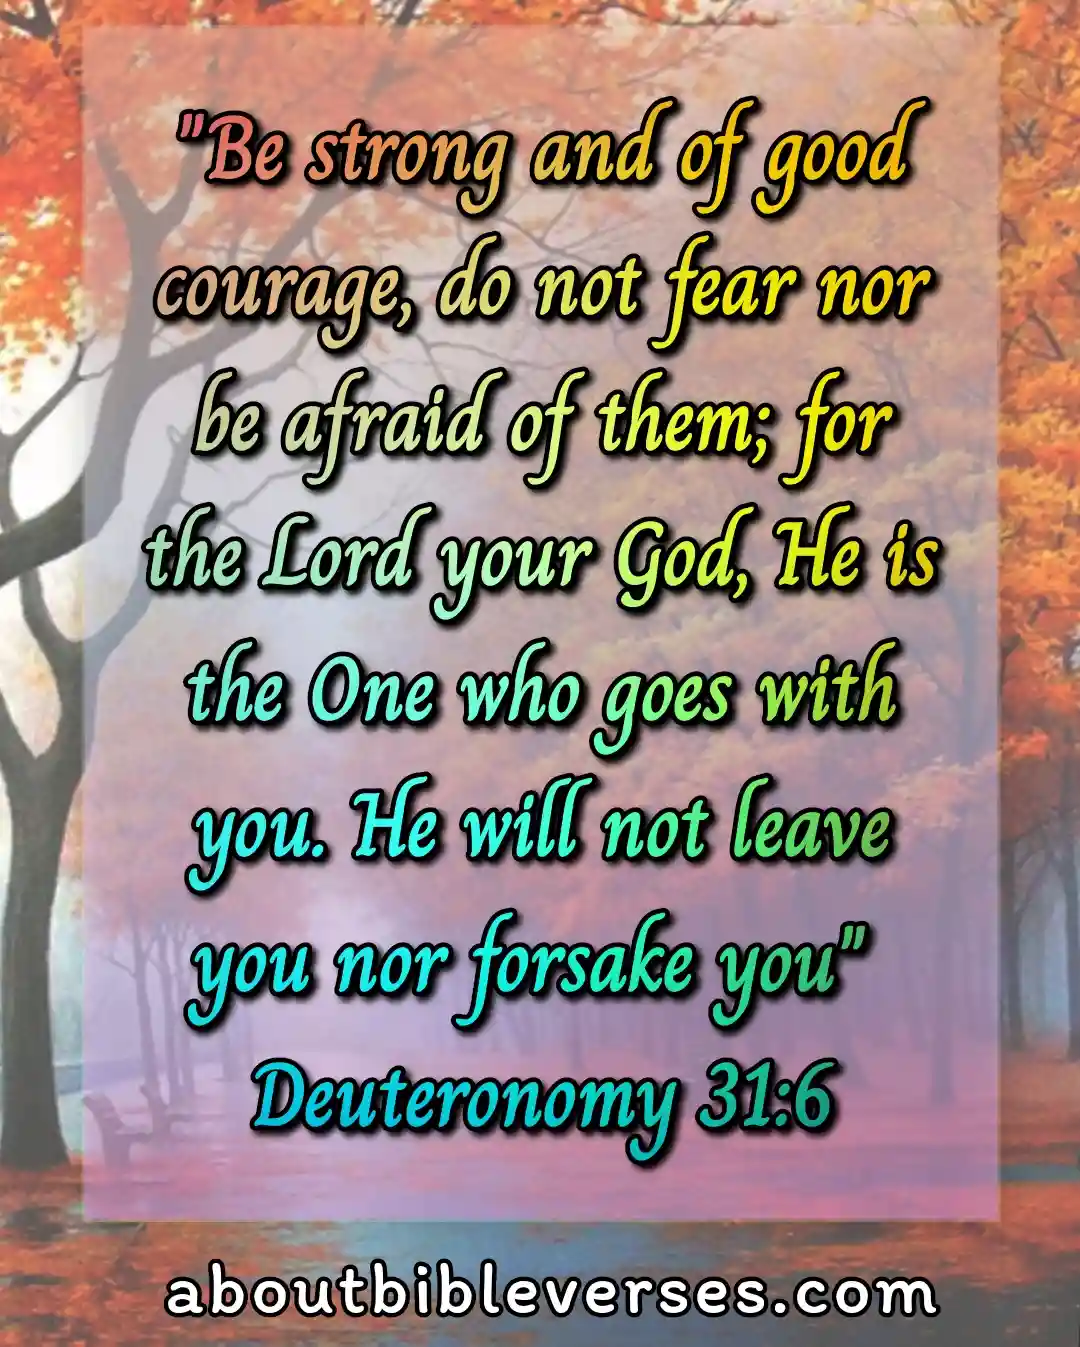 Bible Verses About God's Army (Deuteronomy 31:6)